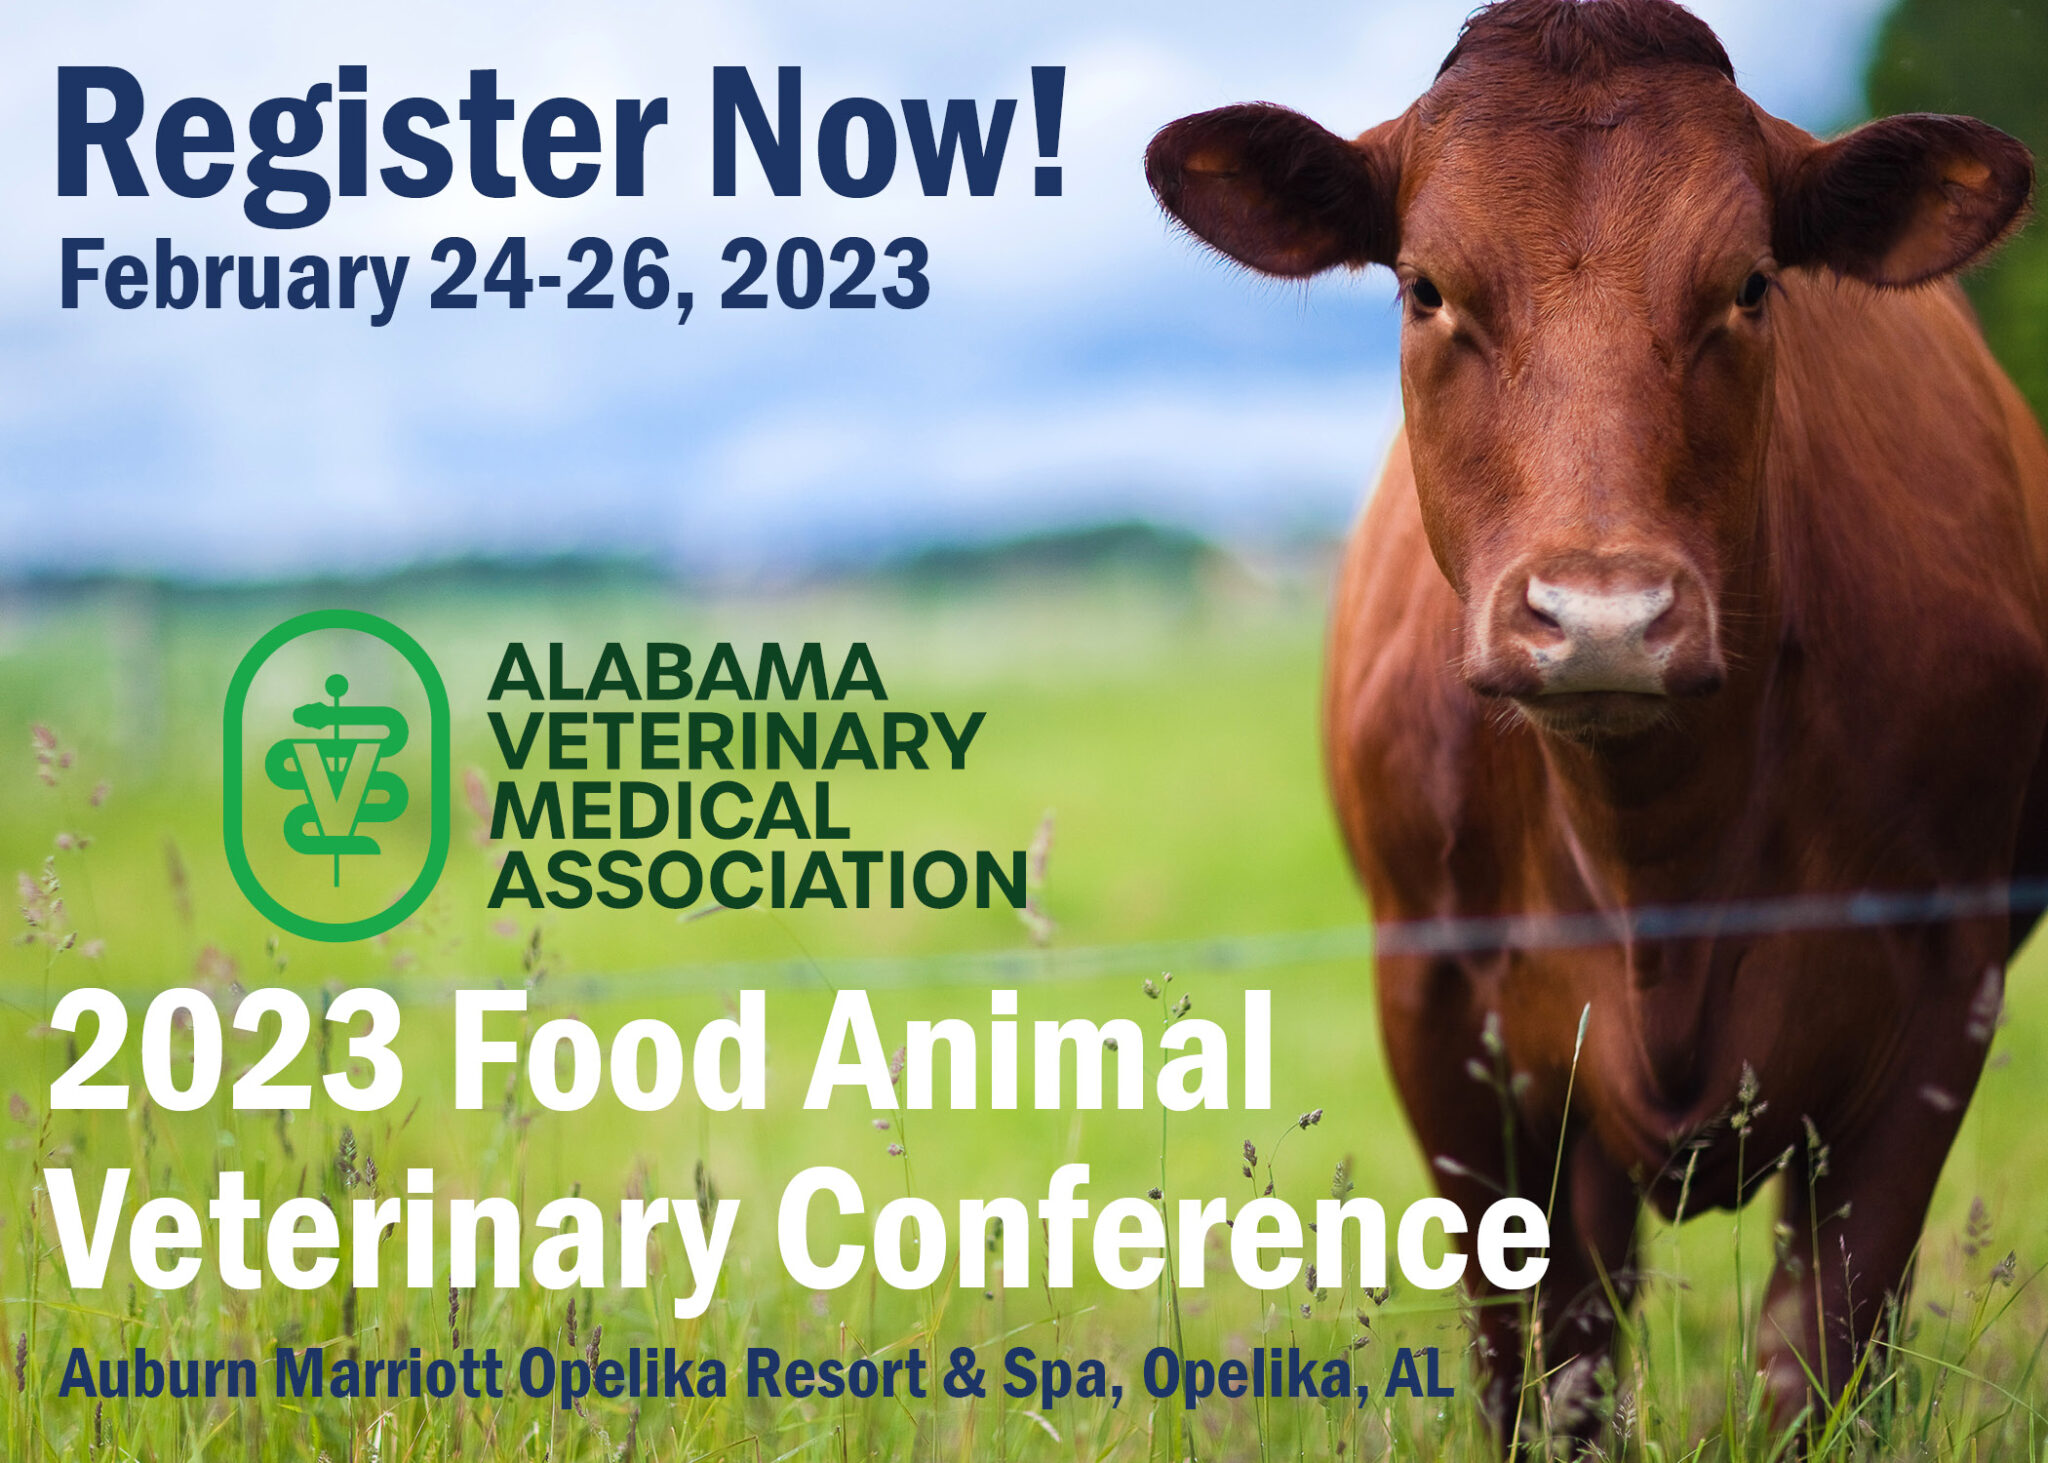 Register Now for the 2023 Food Animal Veterinary Conference! ALVMA